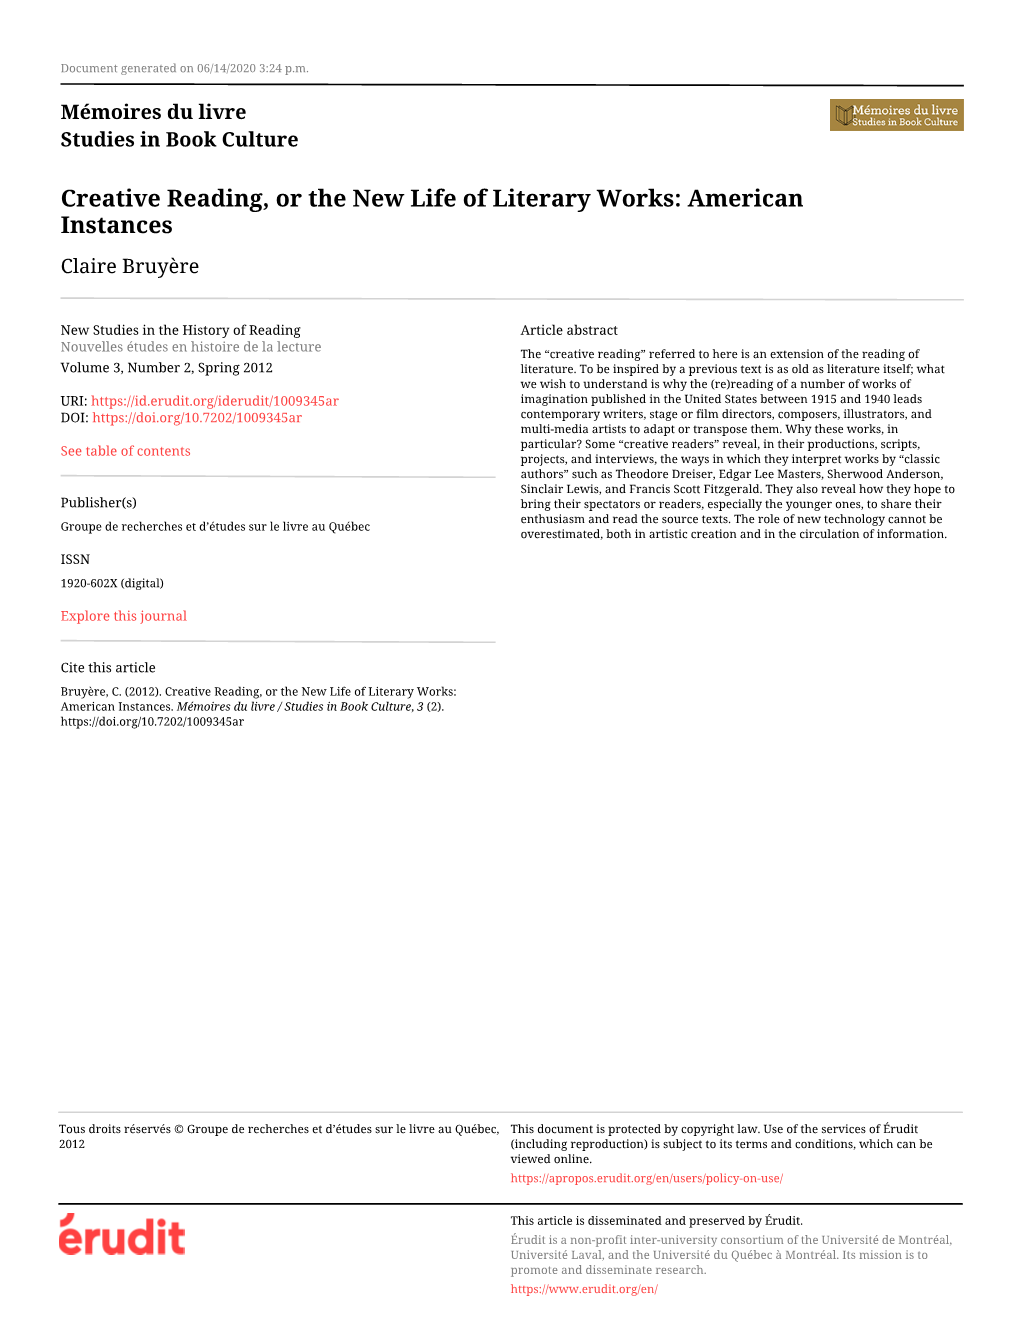 Creative Reading, Or the New Life of Literary Works: American Instances Claire Bruyère